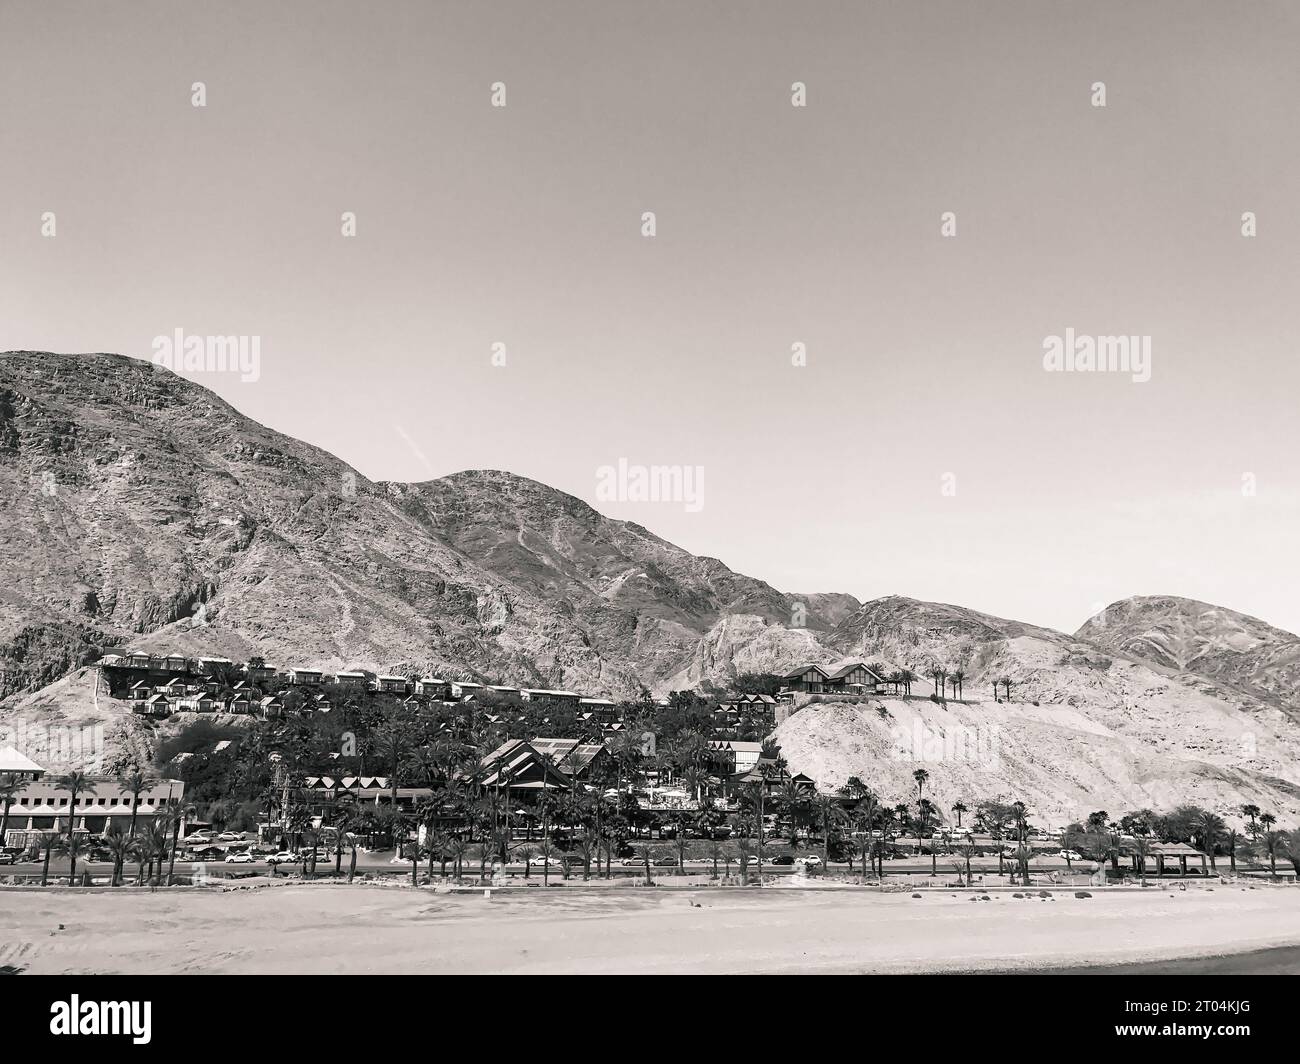 Orchid Eilat beachfront hotel located mountainside overlooking the Red Sea Bay and the Red Mountains in black and white Stock Photo